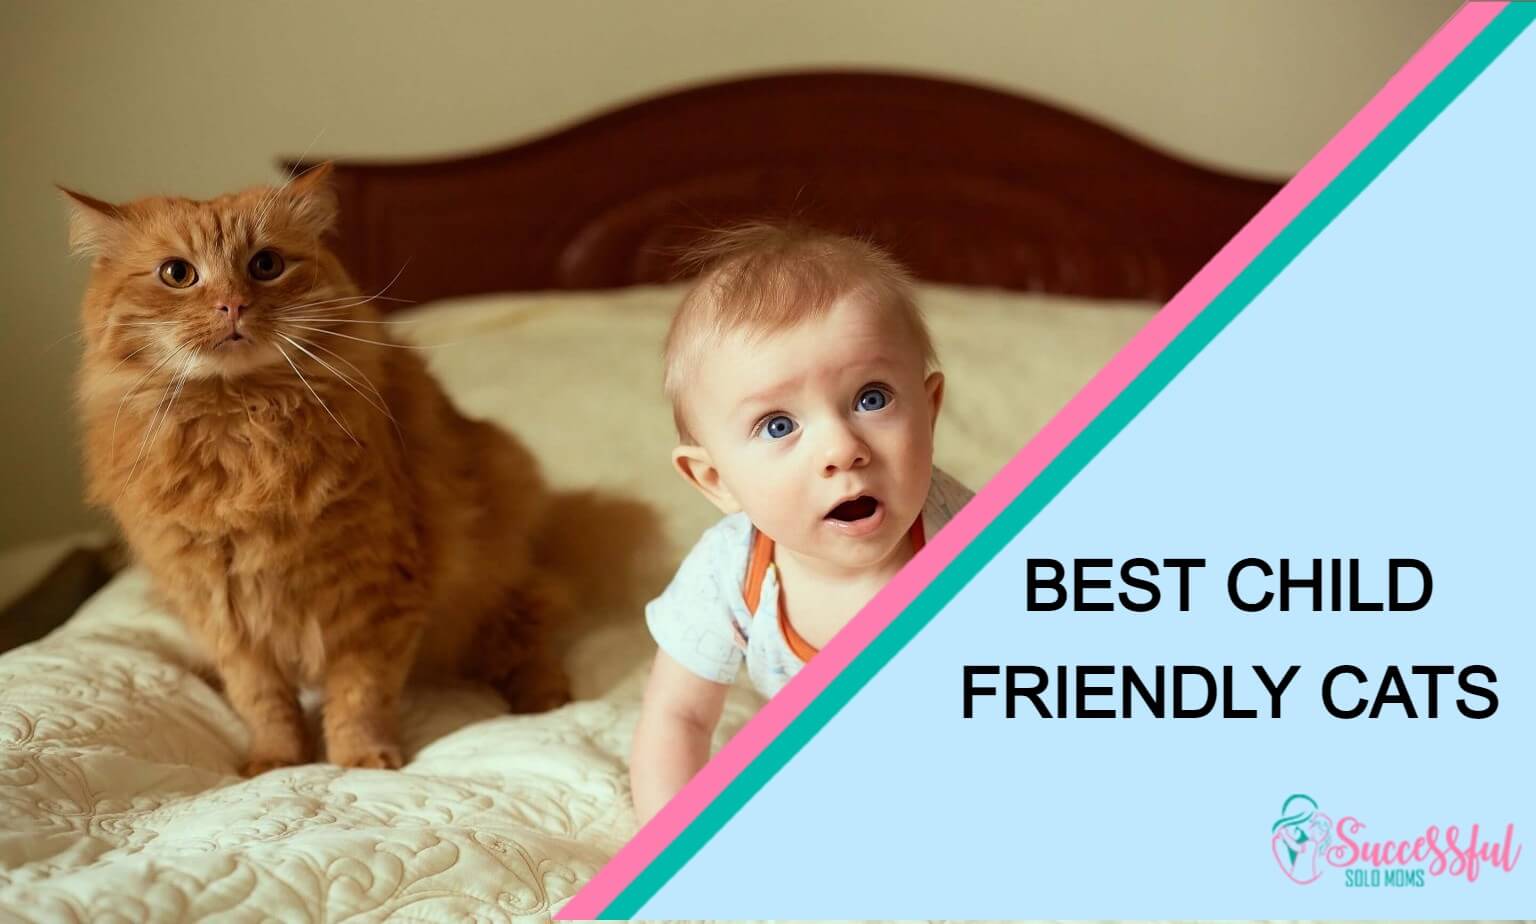 Child Friendly Cats: Best Cat Breeds for Your Kids